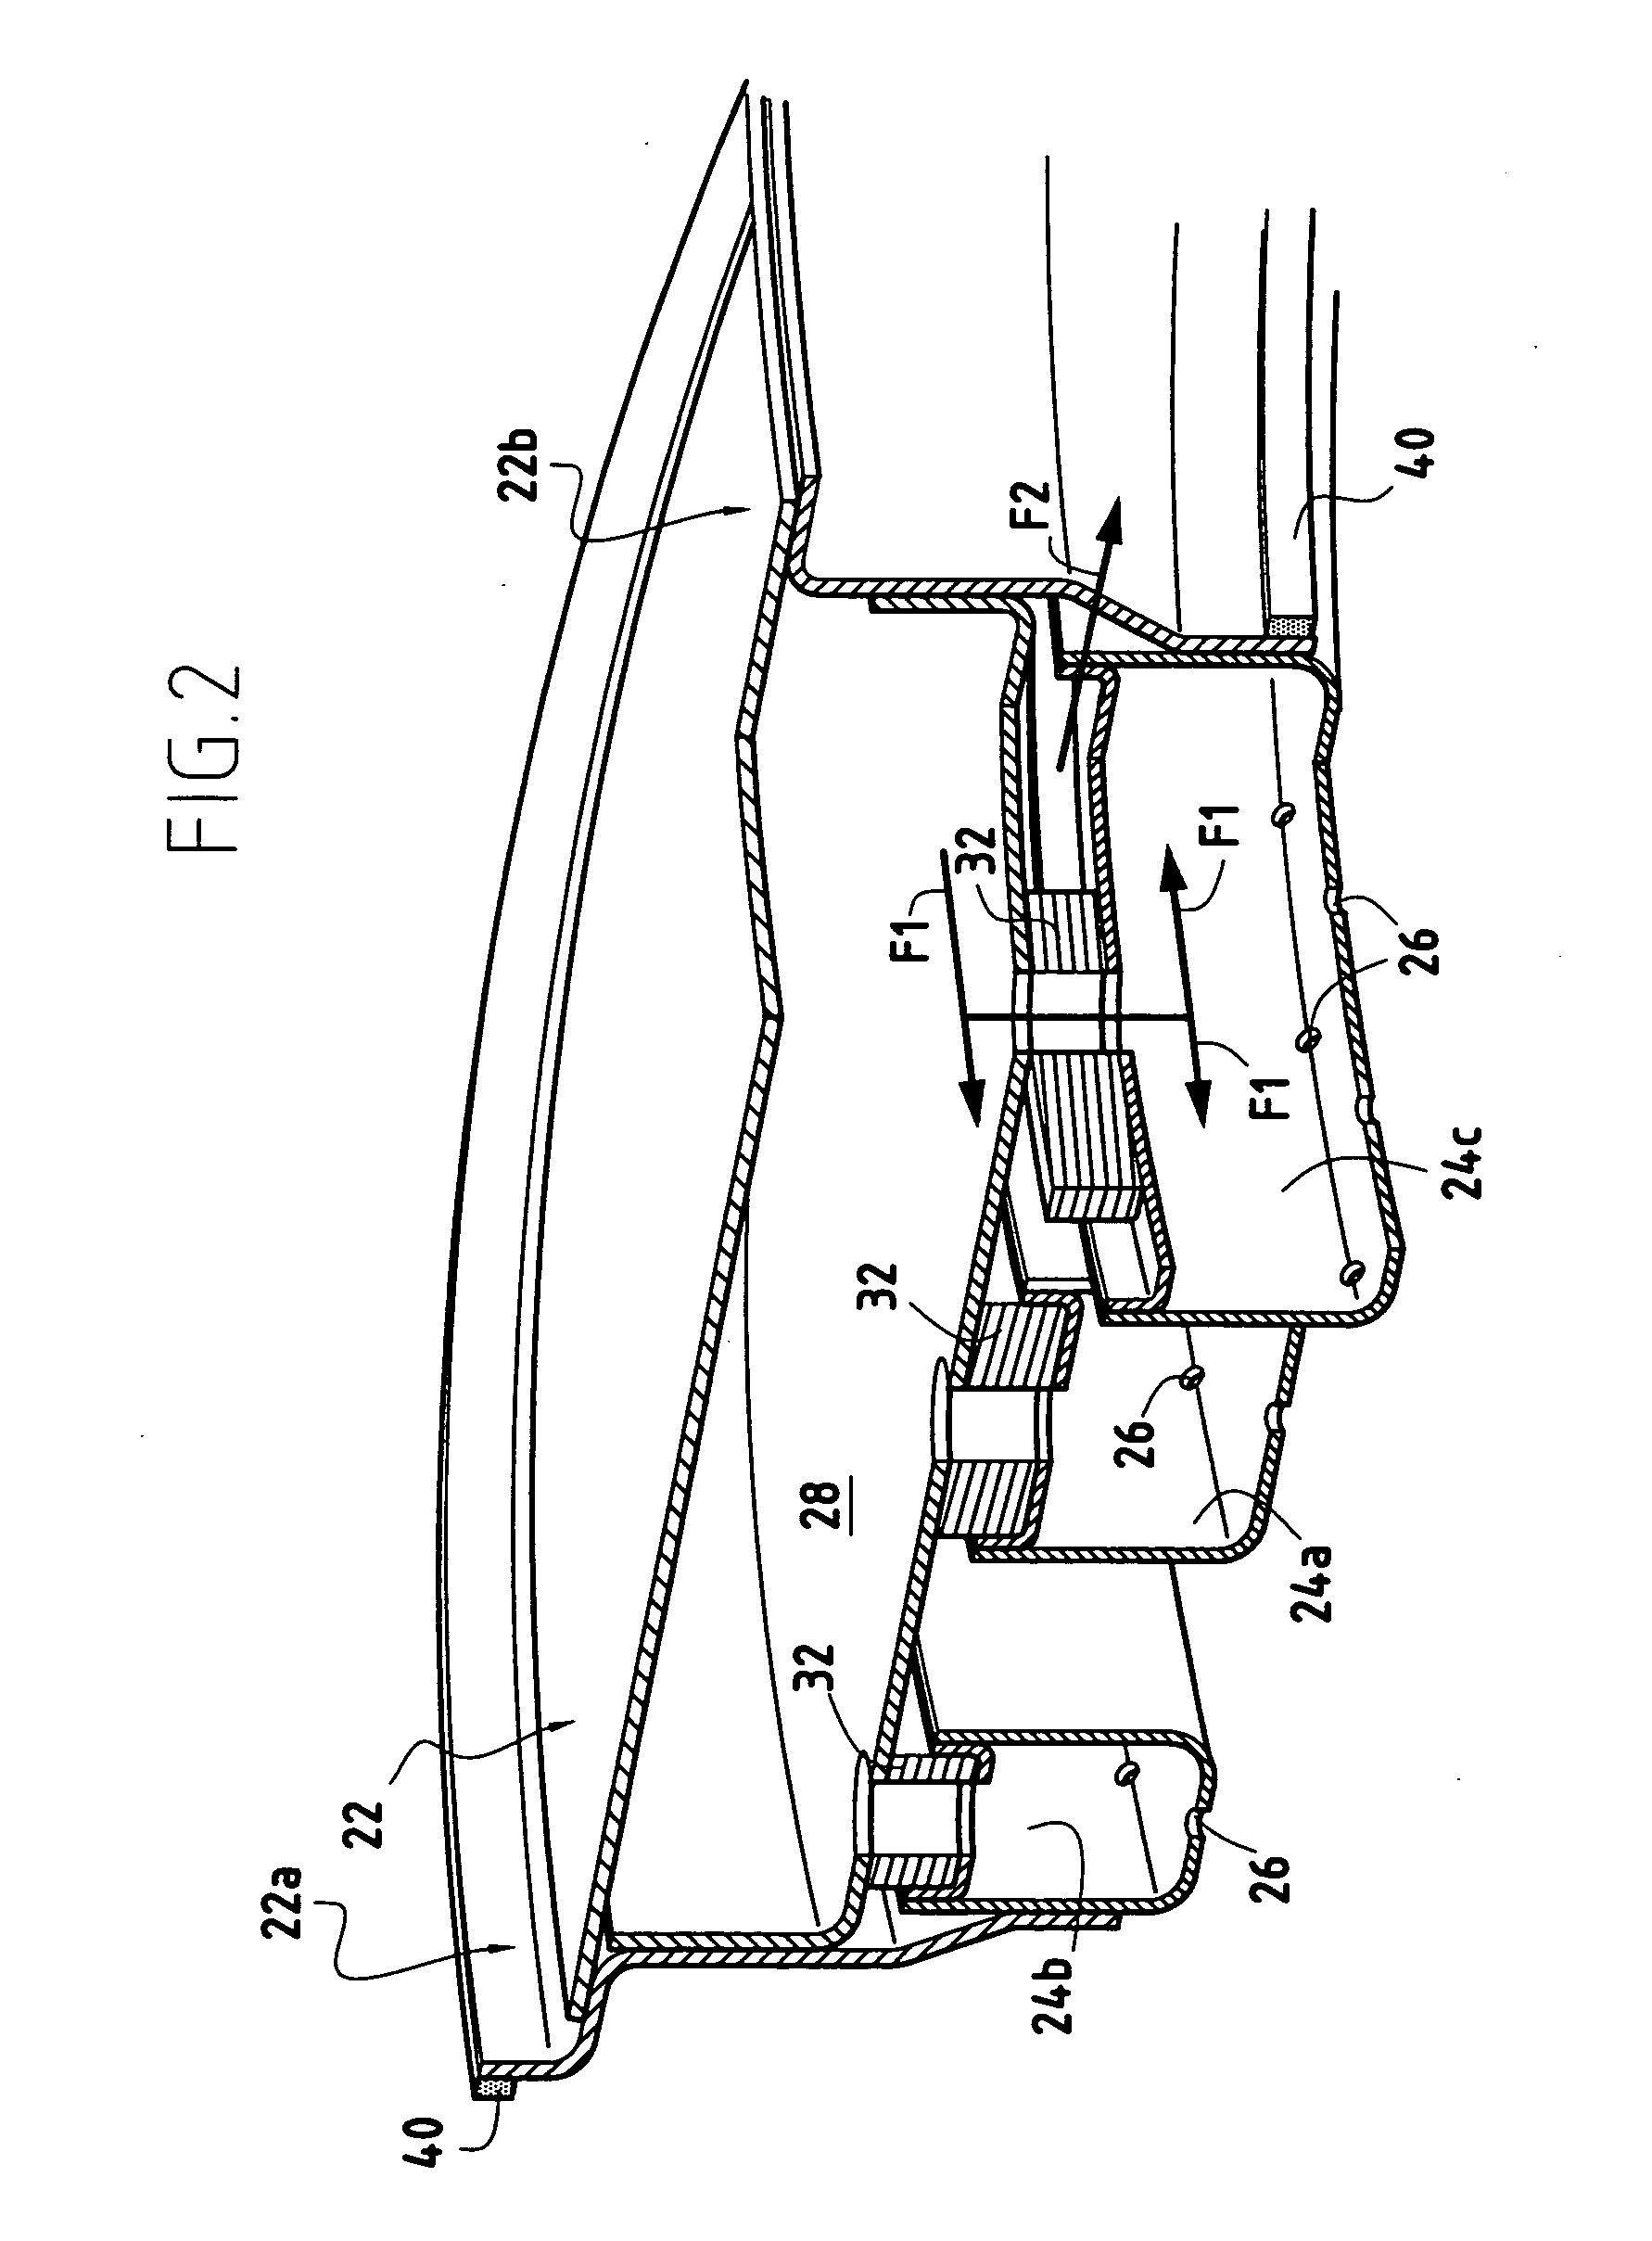 Device for controlling clearance in a gas turbine